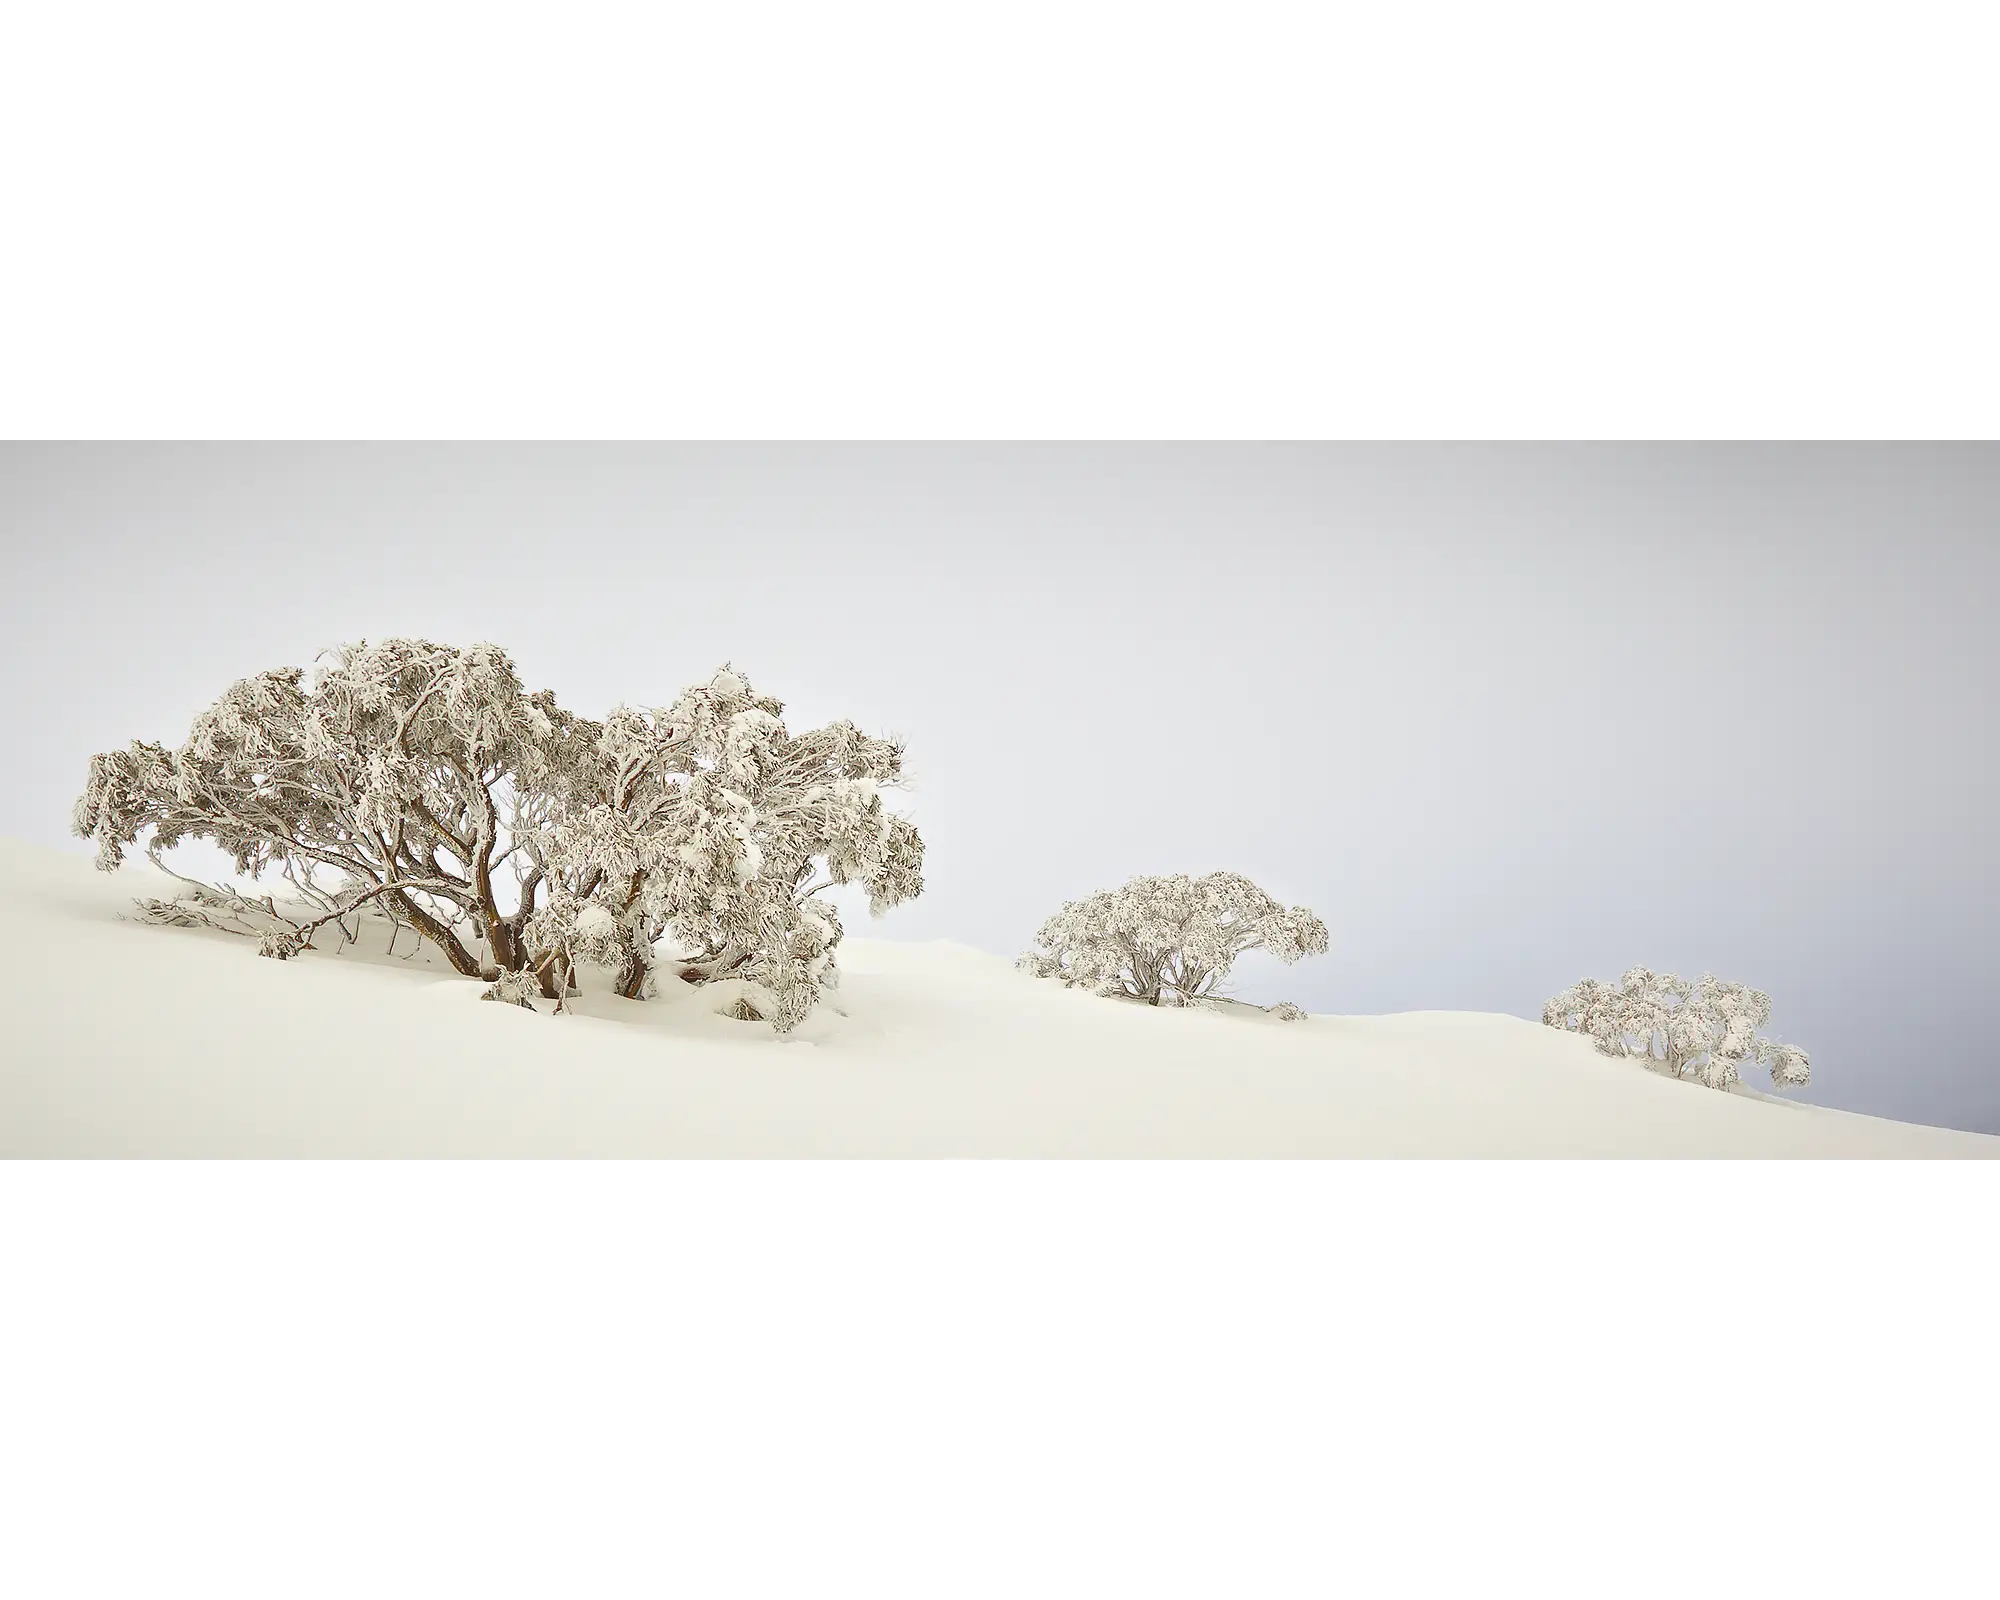 Snow gums buried in the snow at Mount Hotham, Alpine National Park, Victoria.